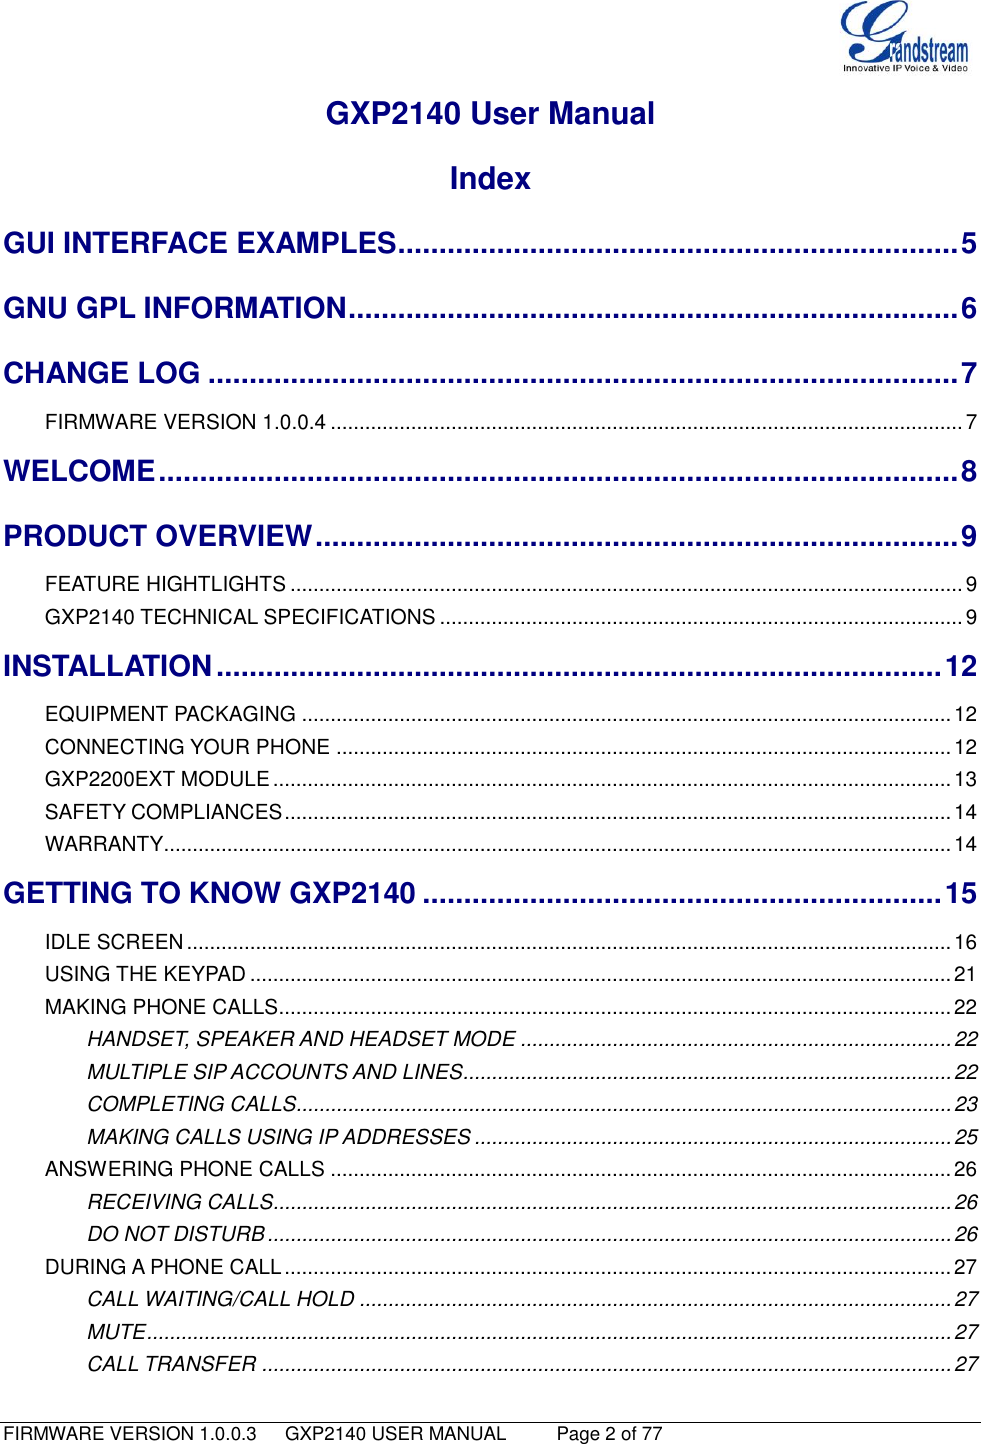   FIRMWARE VERSION 1.0.0.3   GXP2140 USER MANUAL     Page 2 of 77                                   GXP2140 User Manual Index GUI INTERFACE EXAMPLES .................................................................... 5 GNU GPL INFORMATION .......................................................................... 6 CHANGE LOG ........................................................................................... 7 FIRMWARE VERSION 1.0.0.4 .............................................................................................................. 7 WELCOME ................................................................................................. 8 PRODUCT OVERVIEW .............................................................................. 9 FEATURE HIGHTLIGHTS ..................................................................................................................... 9 GXP2140 TECHNICAL SPECIFICATIONS ........................................................................................... 9 INSTALLATION ........................................................................................ 12 EQUIPMENT PACKAGING ................................................................................................................. 12 CONNECTING YOUR PHONE ........................................................................................................... 12 GXP2200EXT MODULE ...................................................................................................................... 13 SAFETY COMPLIANCES .................................................................................................................... 14 WARRANTY ......................................................................................................................................... 14 GETTING TO KNOW GXP2140 ............................................................... 15 IDLE SCREEN ..................................................................................................................................... 16 USING THE KEYPAD .......................................................................................................................... 21 MAKING PHONE CALLS..................................................................................................................... 22 HANDSET, SPEAKER AND HEADSET MODE ........................................................................... 22 MULTIPLE SIP ACCOUNTS AND LINES ..................................................................................... 22 COMPLETING CALLS.................................................................................................................. 23 MAKING CALLS USING IP ADDRESSES ................................................................................... 25 ANSWERING PHONE CALLS ............................................................................................................ 26 RECEIVING CALLS...................................................................................................................... 26 DO NOT DISTURB ....................................................................................................................... 26 DURING A PHONE CALL .................................................................................................................... 27 CALL WAITING/CALL HOLD ....................................................................................................... 27 MUTE ............................................................................................................................................ 27 CALL TRANSFER ........................................................................................................................ 27 